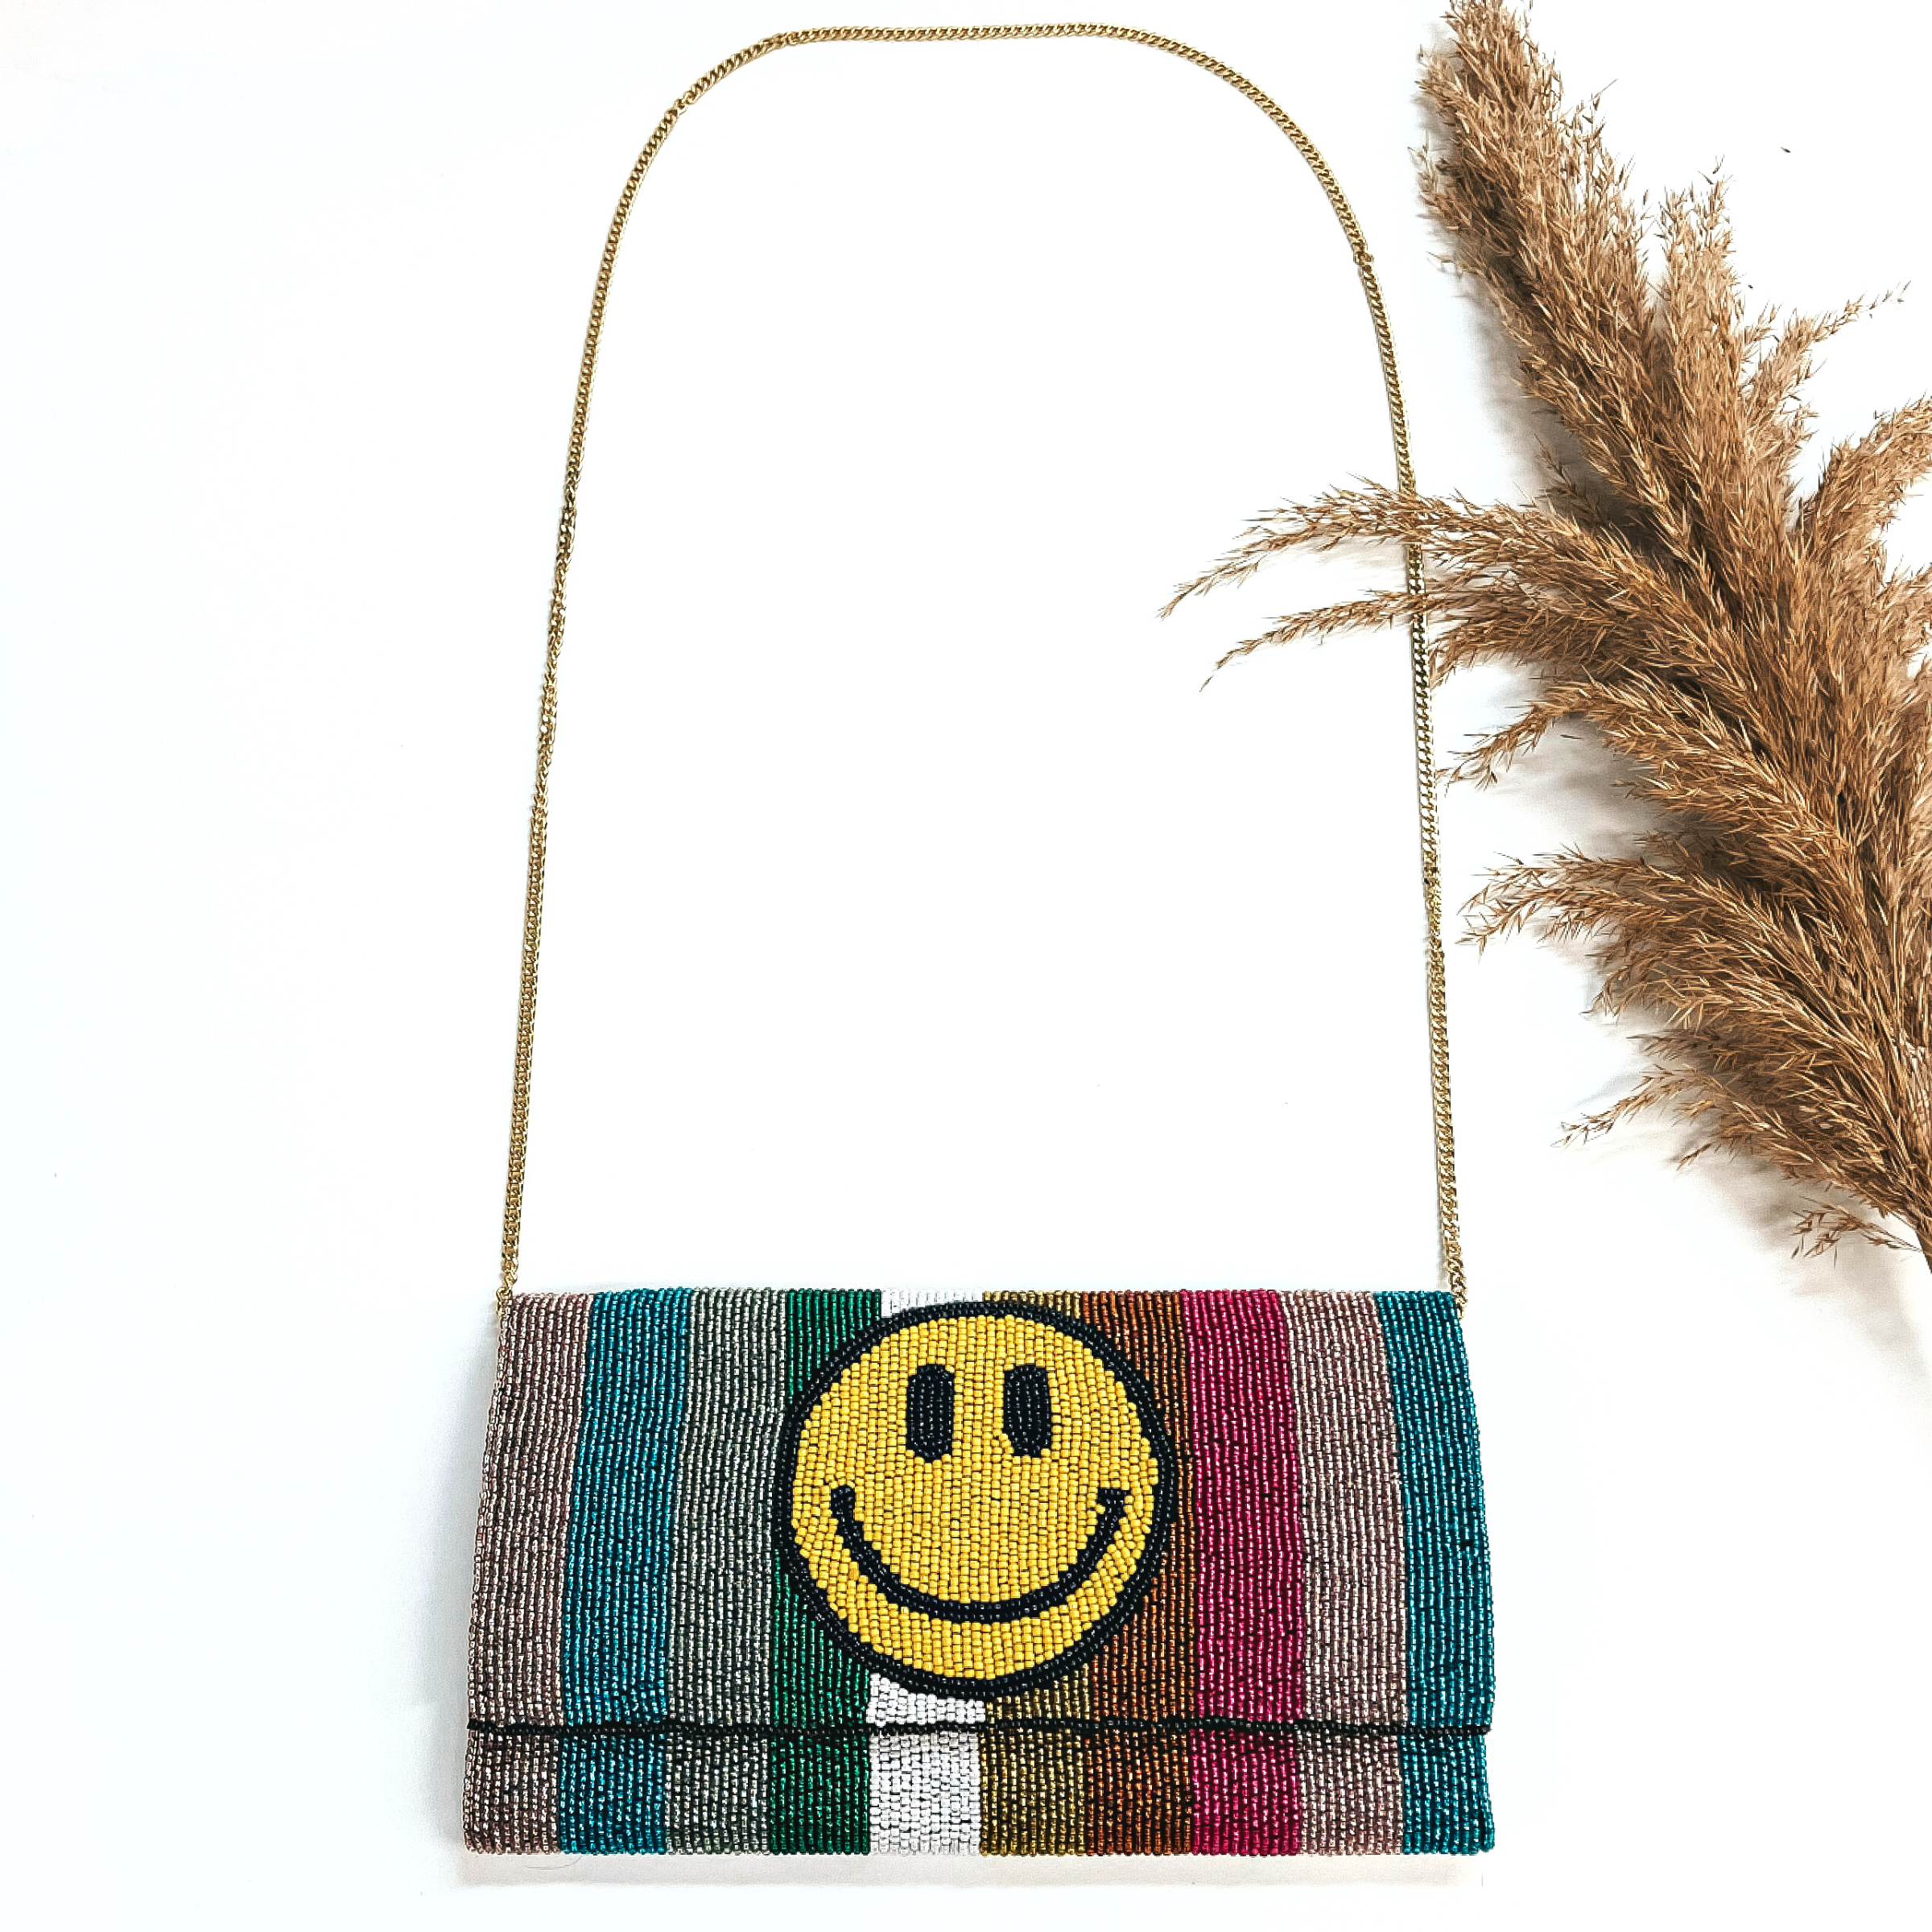 This is a seedbeaded clutch purse with a gold tone chain. This bag is multicolor with  lines and a yellow happy face. Multicolor lines in teal, rose gold, fuchsia, copper,  yellow, white, green, and mint. This bag  is taken laying on a white background with a brown plant in the side as decor.